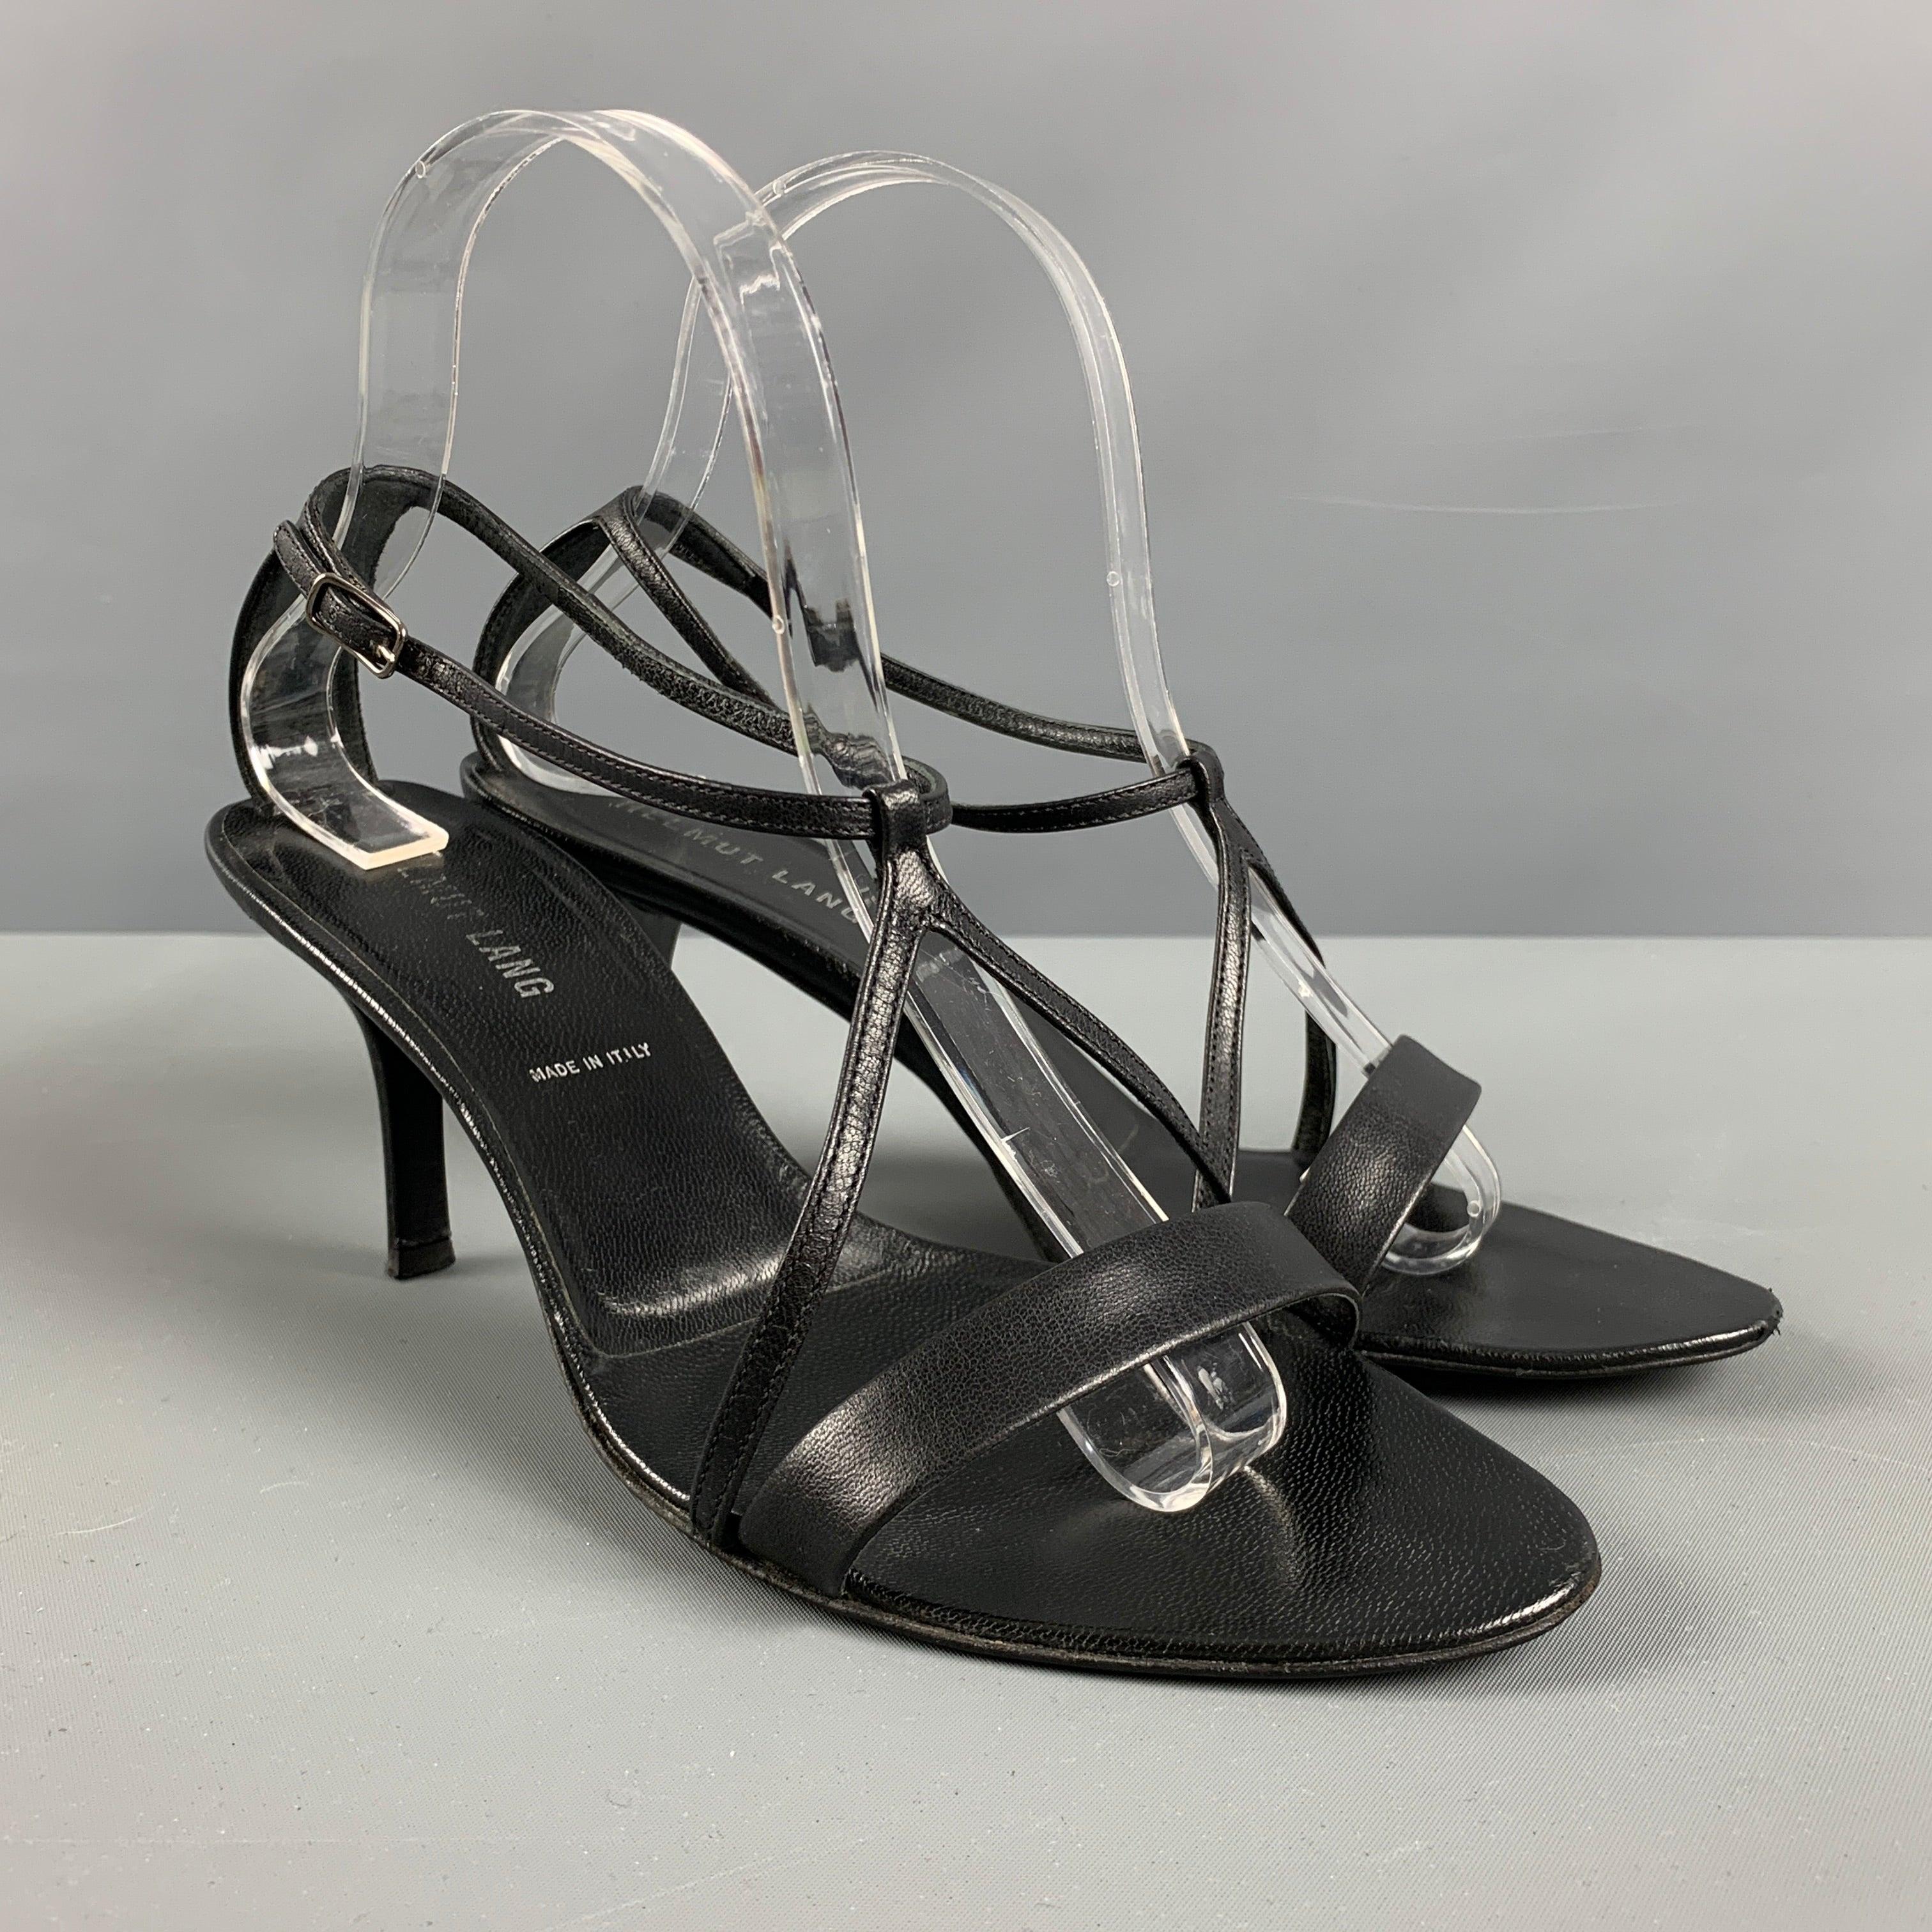 HELMUT LANG sandals comes in a black leather featuring a V-ankle strap, and a stiletto heel. Made in Italy.Very Good Pre-Owned Condition. Minor signs of wear. 

Marked:   38 1/2 

Measurements: 
  Heel: 3.25 inches 
  
  
 
Reference No.: